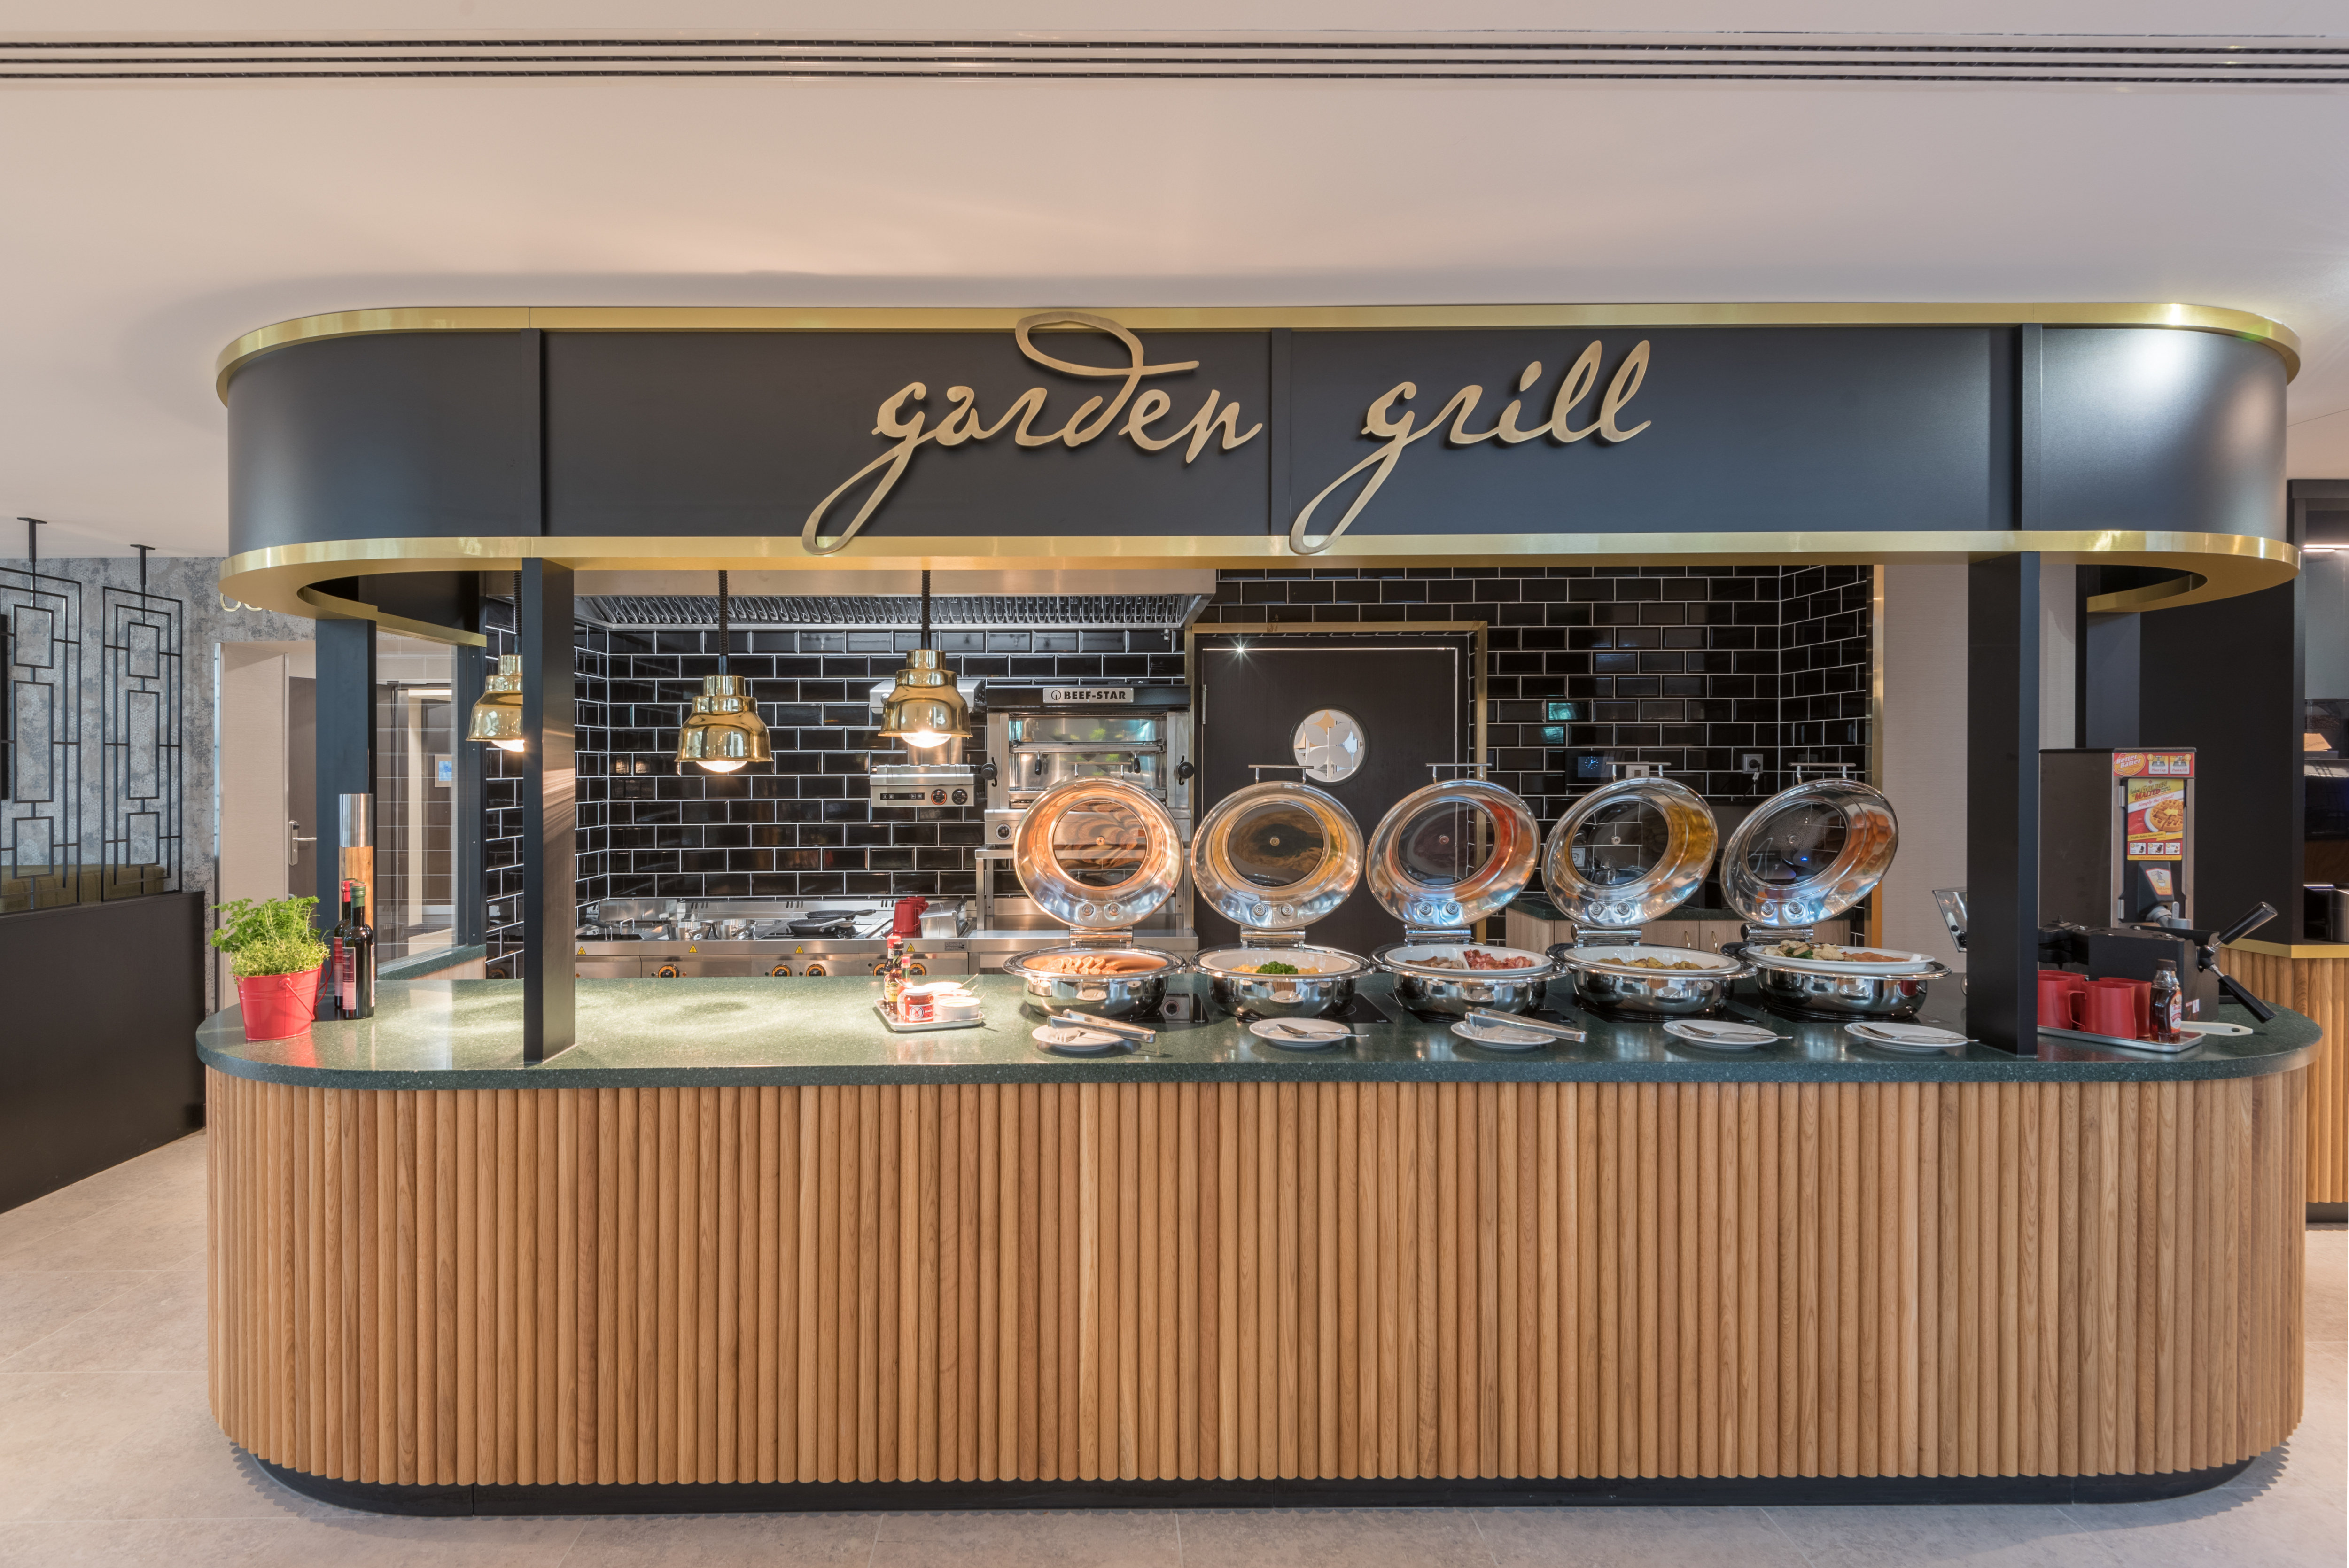 Hot food area in grill